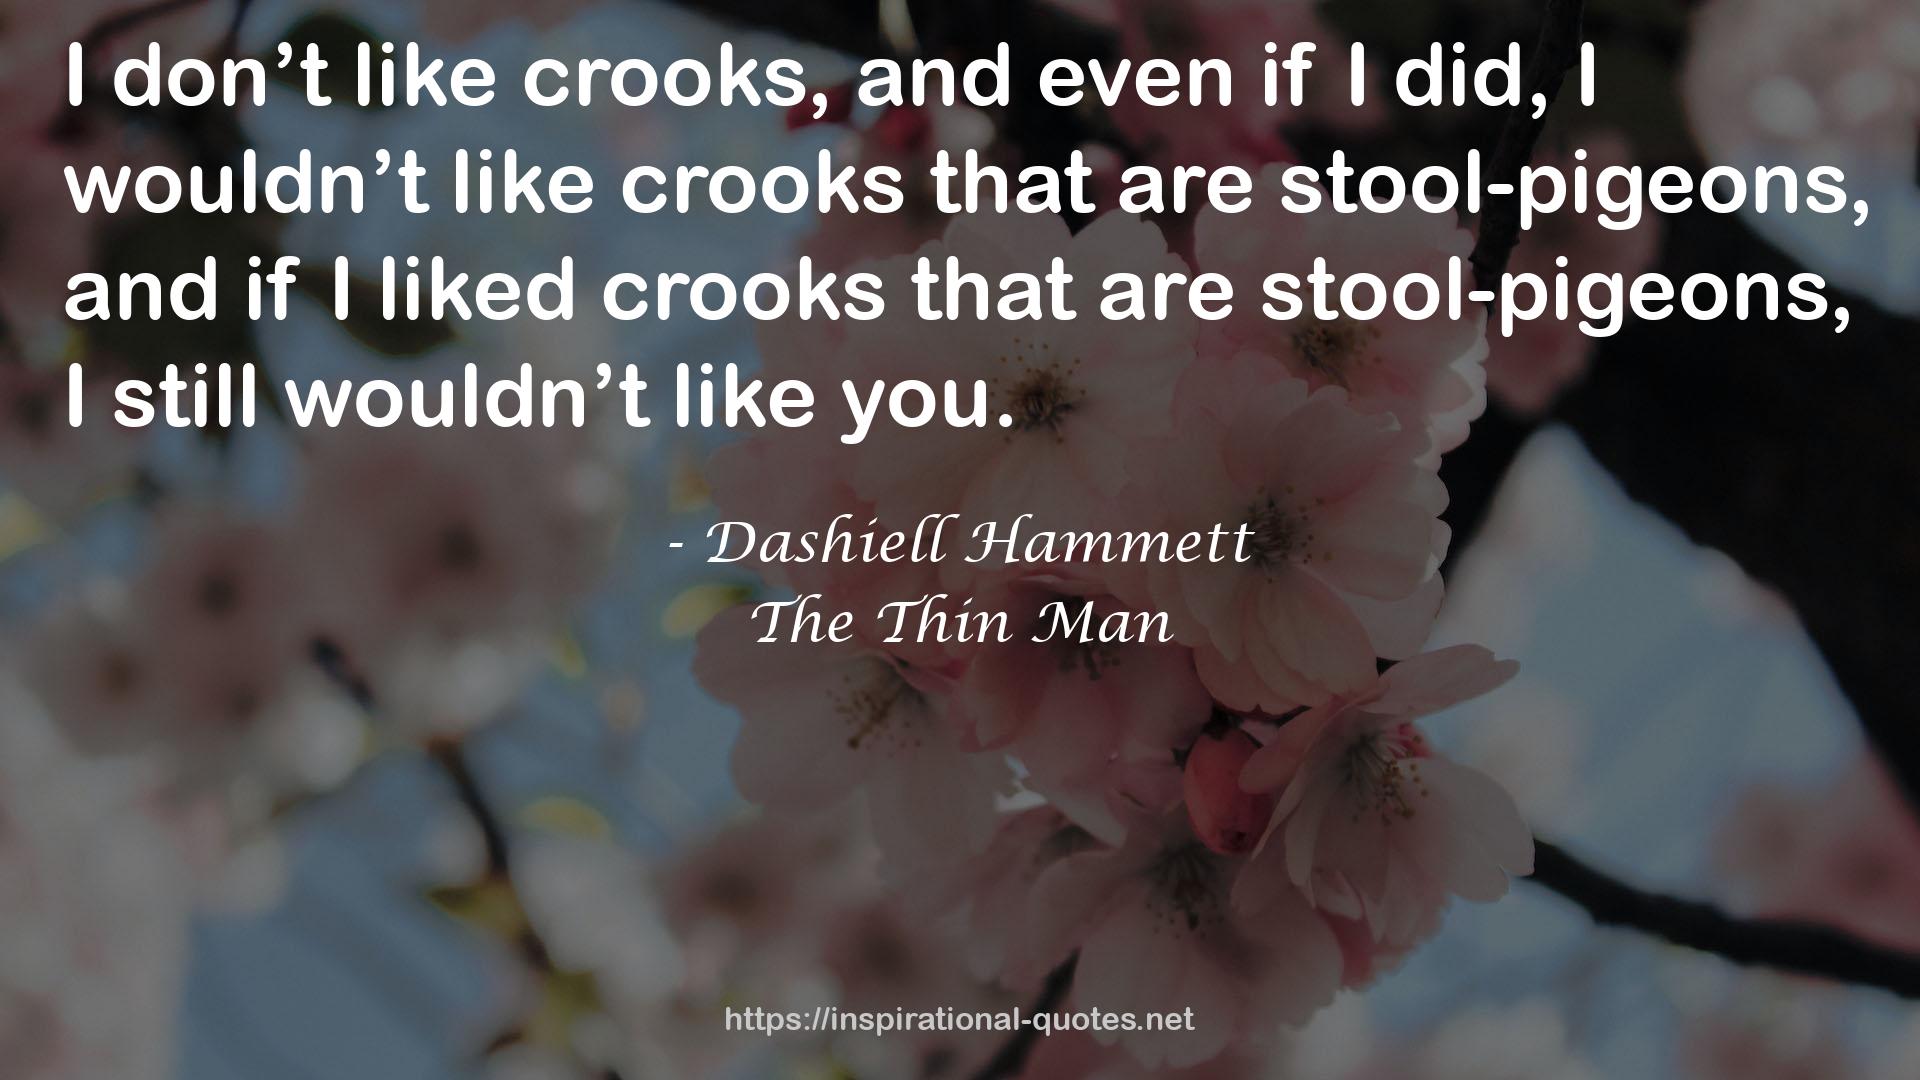 The Thin Man QUOTES